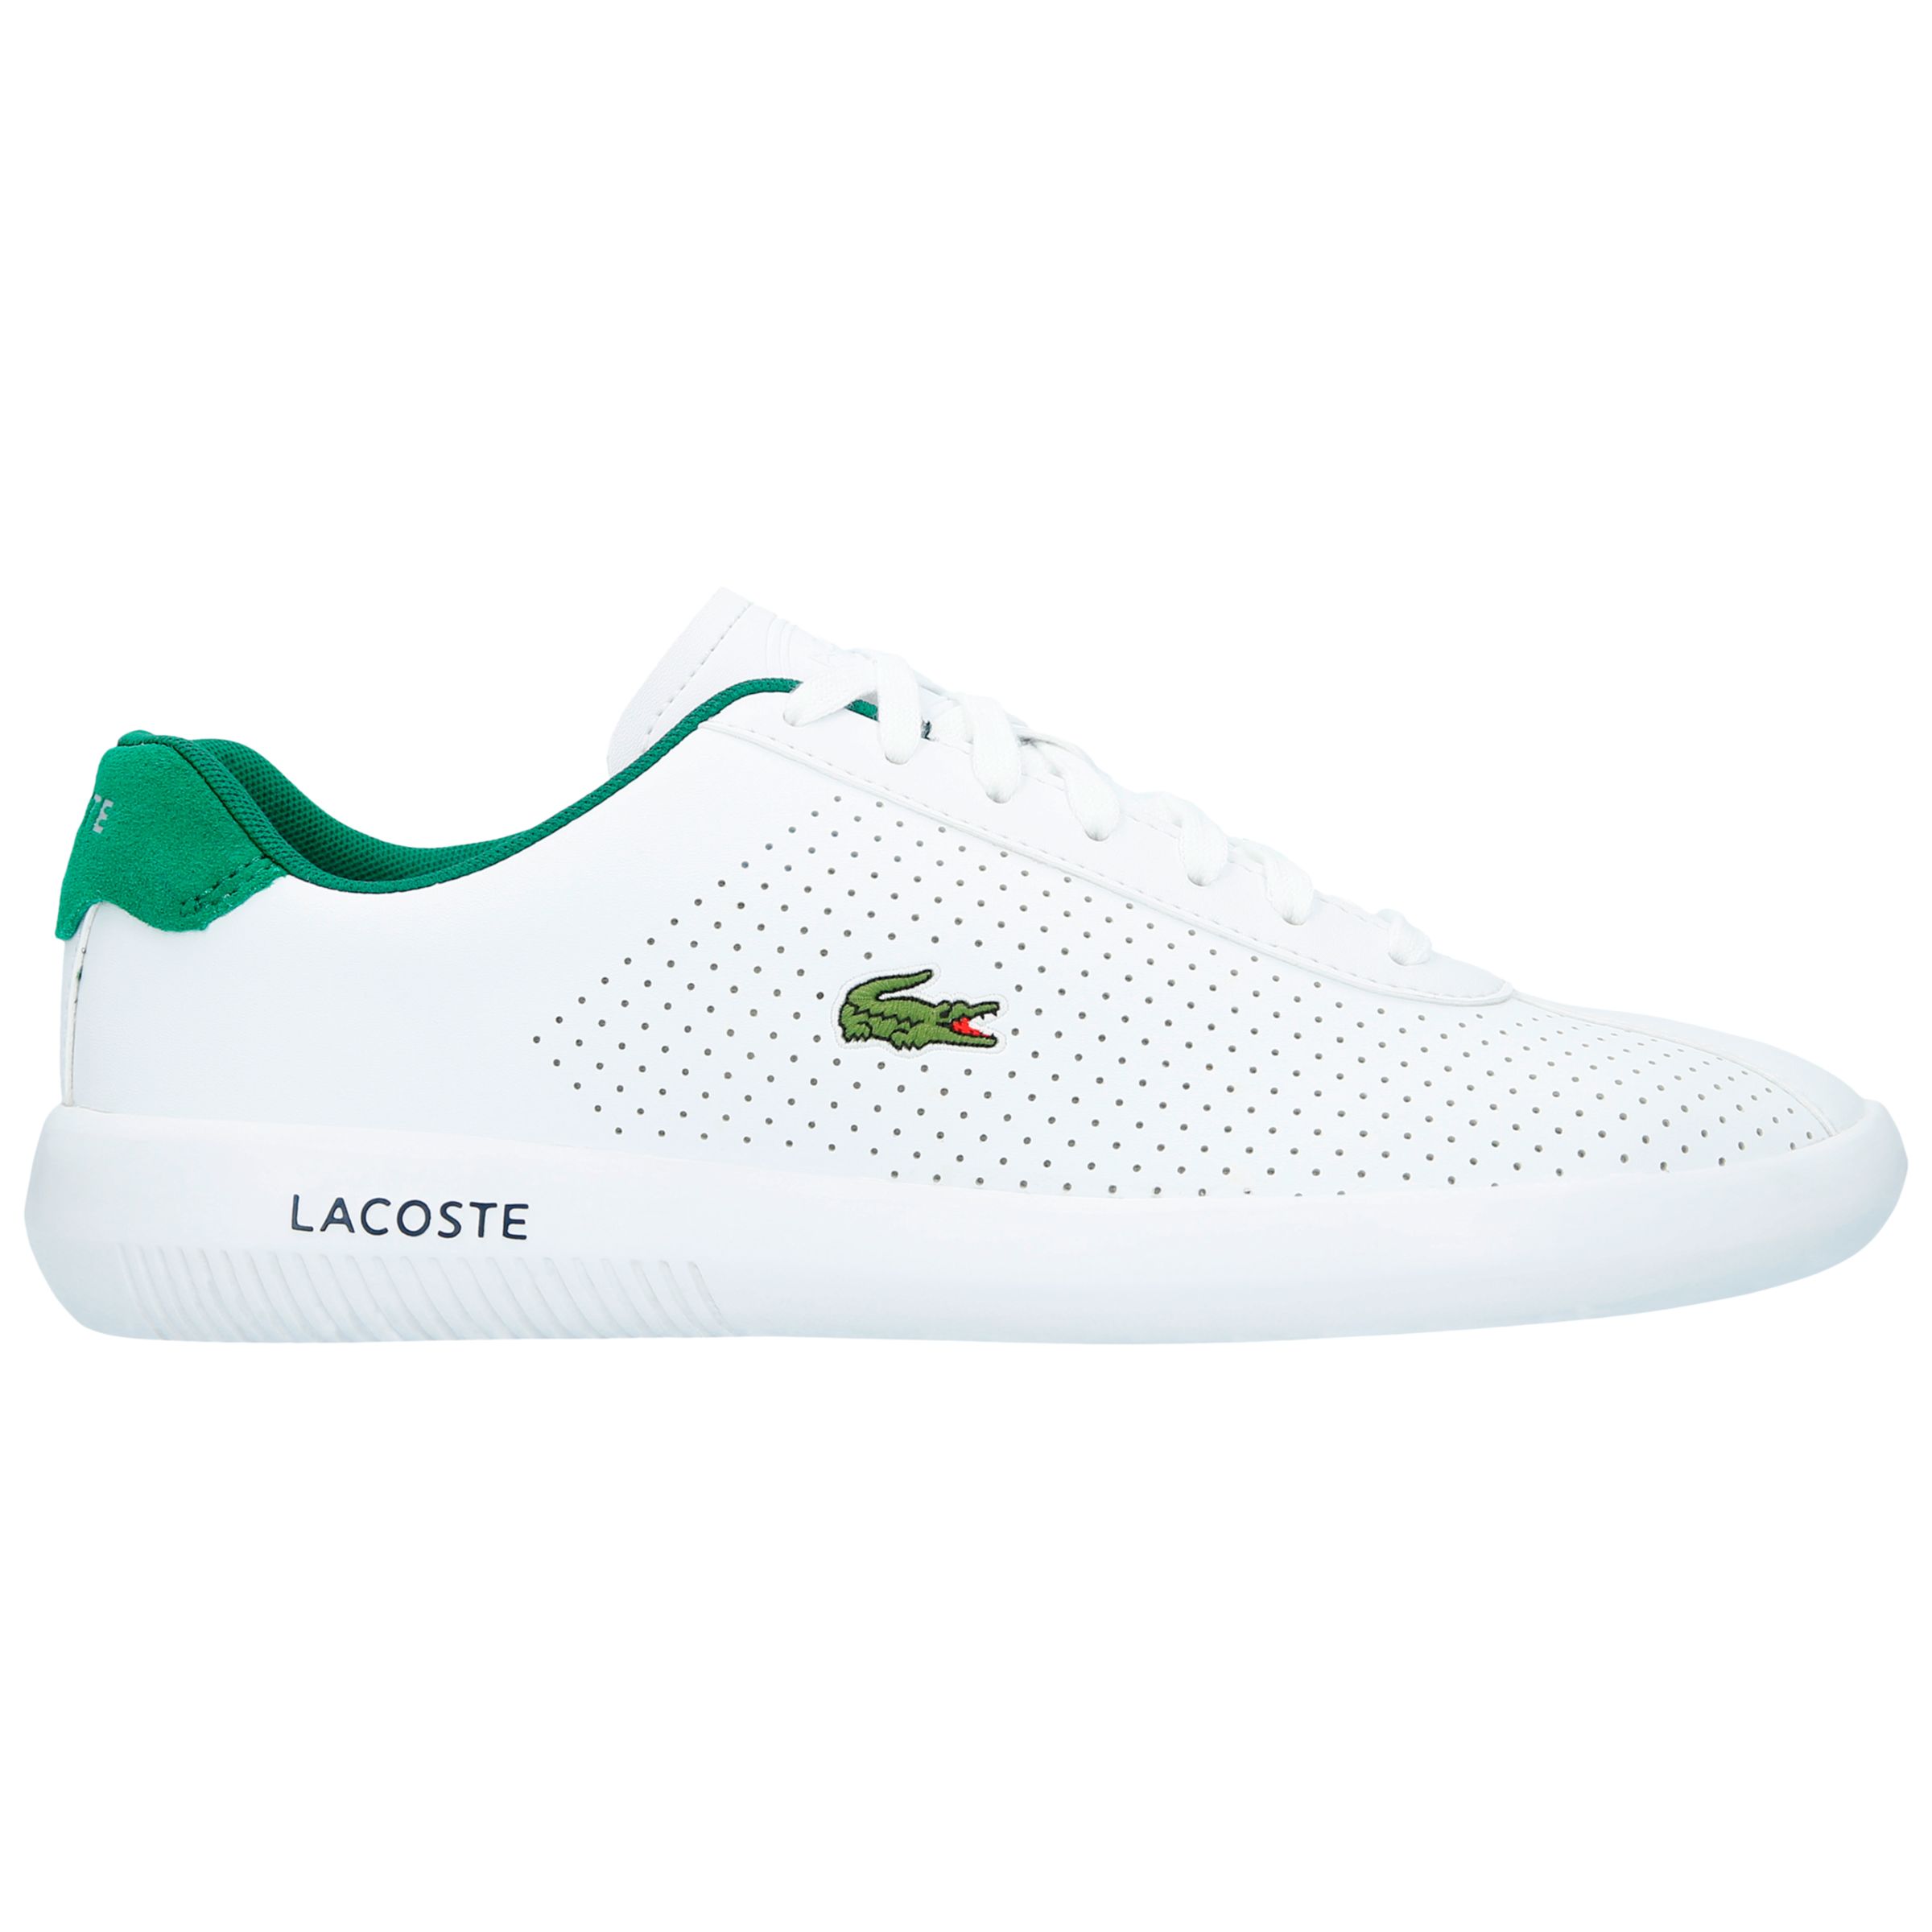 lacoste shoes green